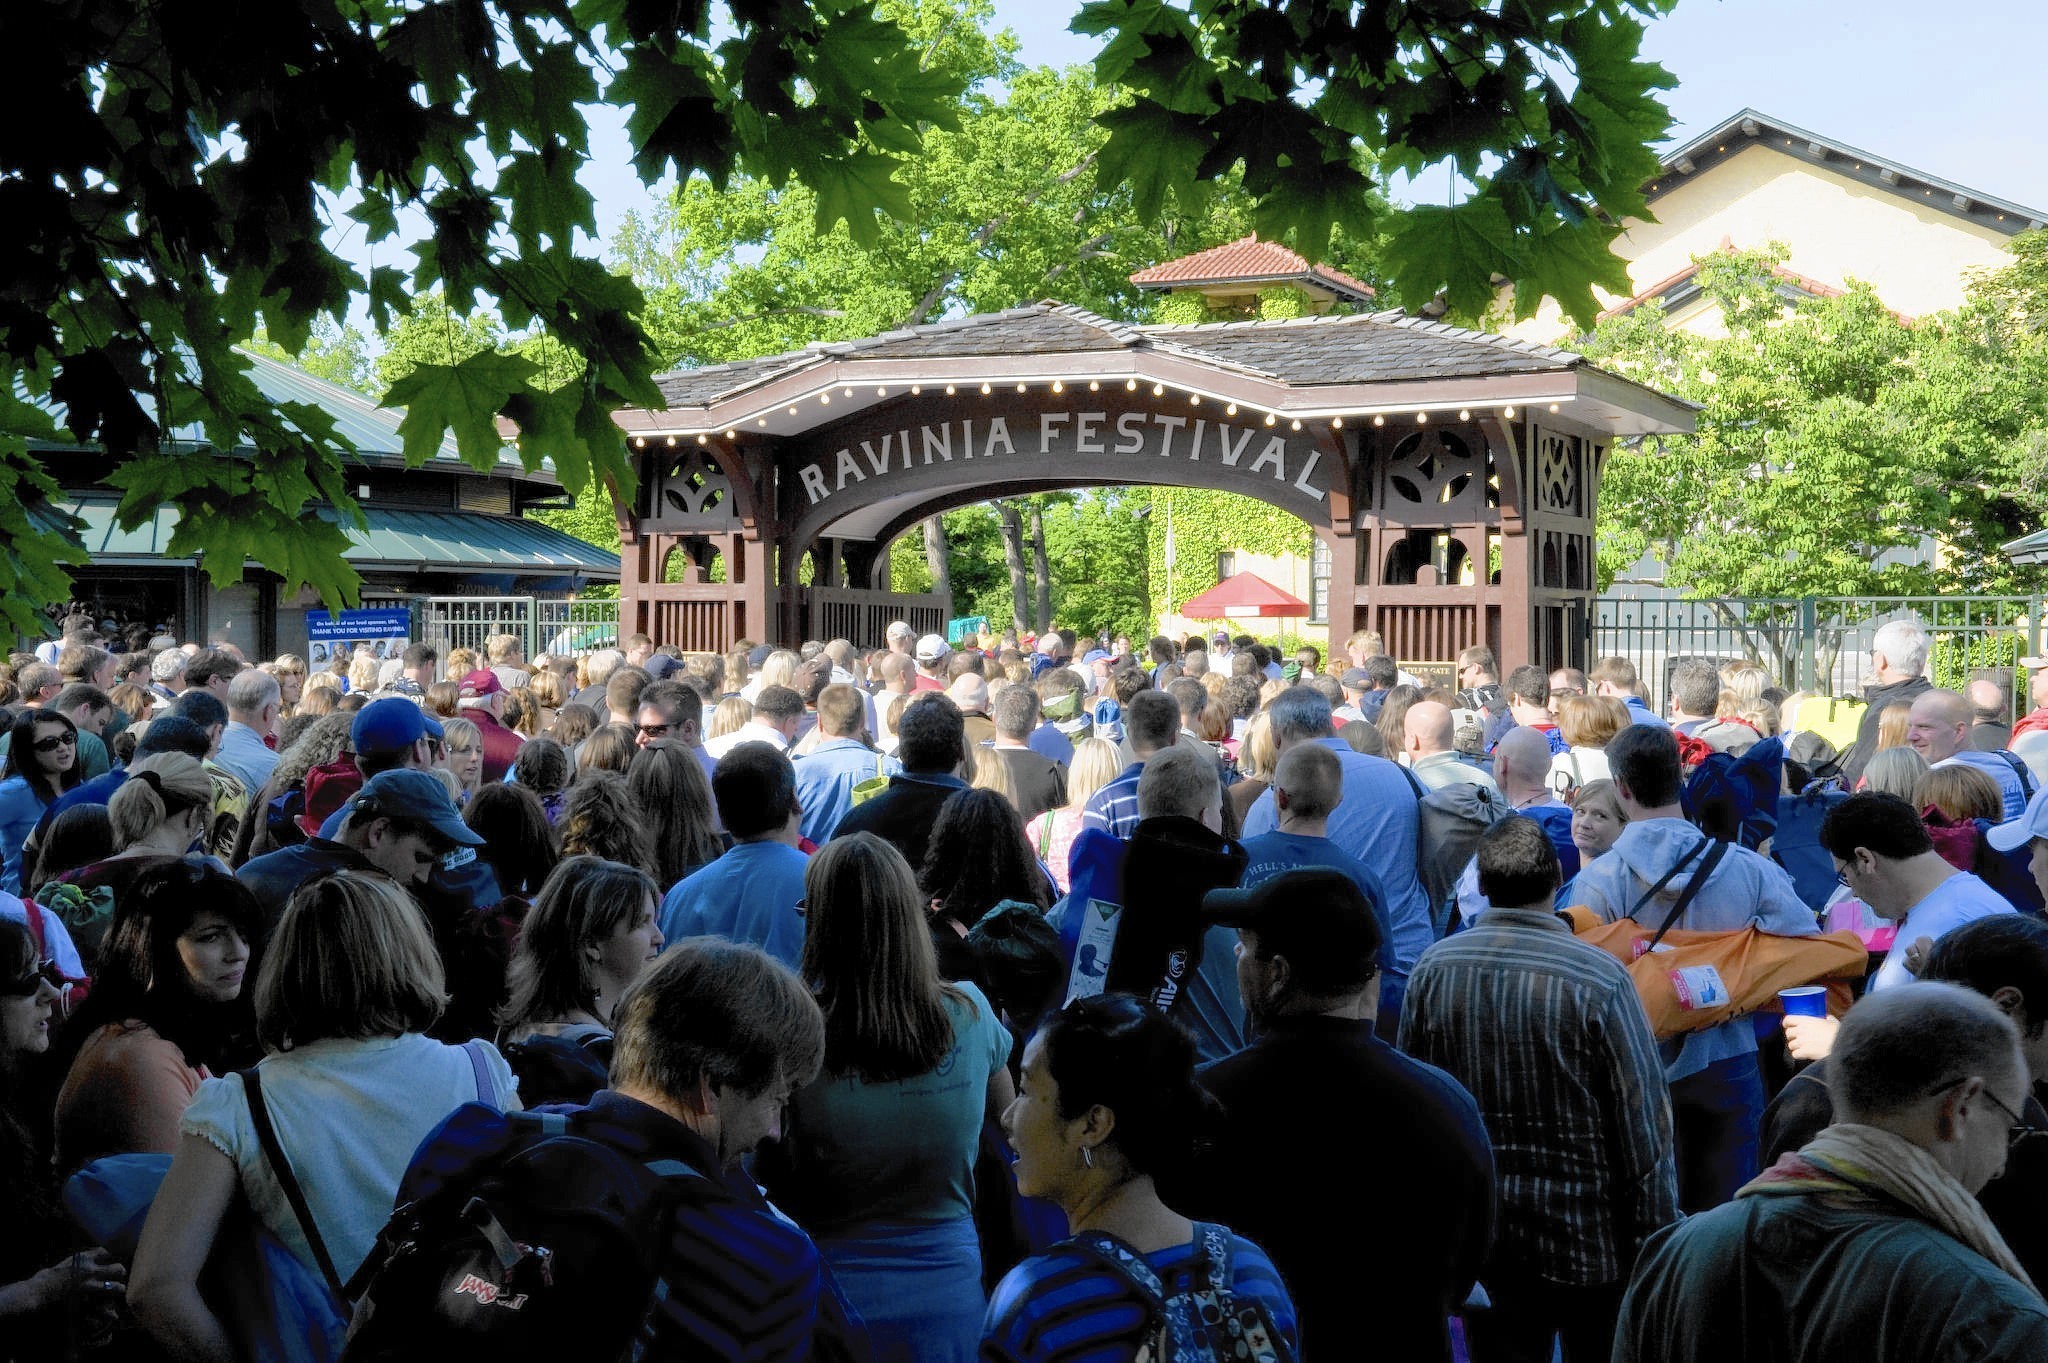 Ready for Ravinia? Season highlights and what's new at the festival